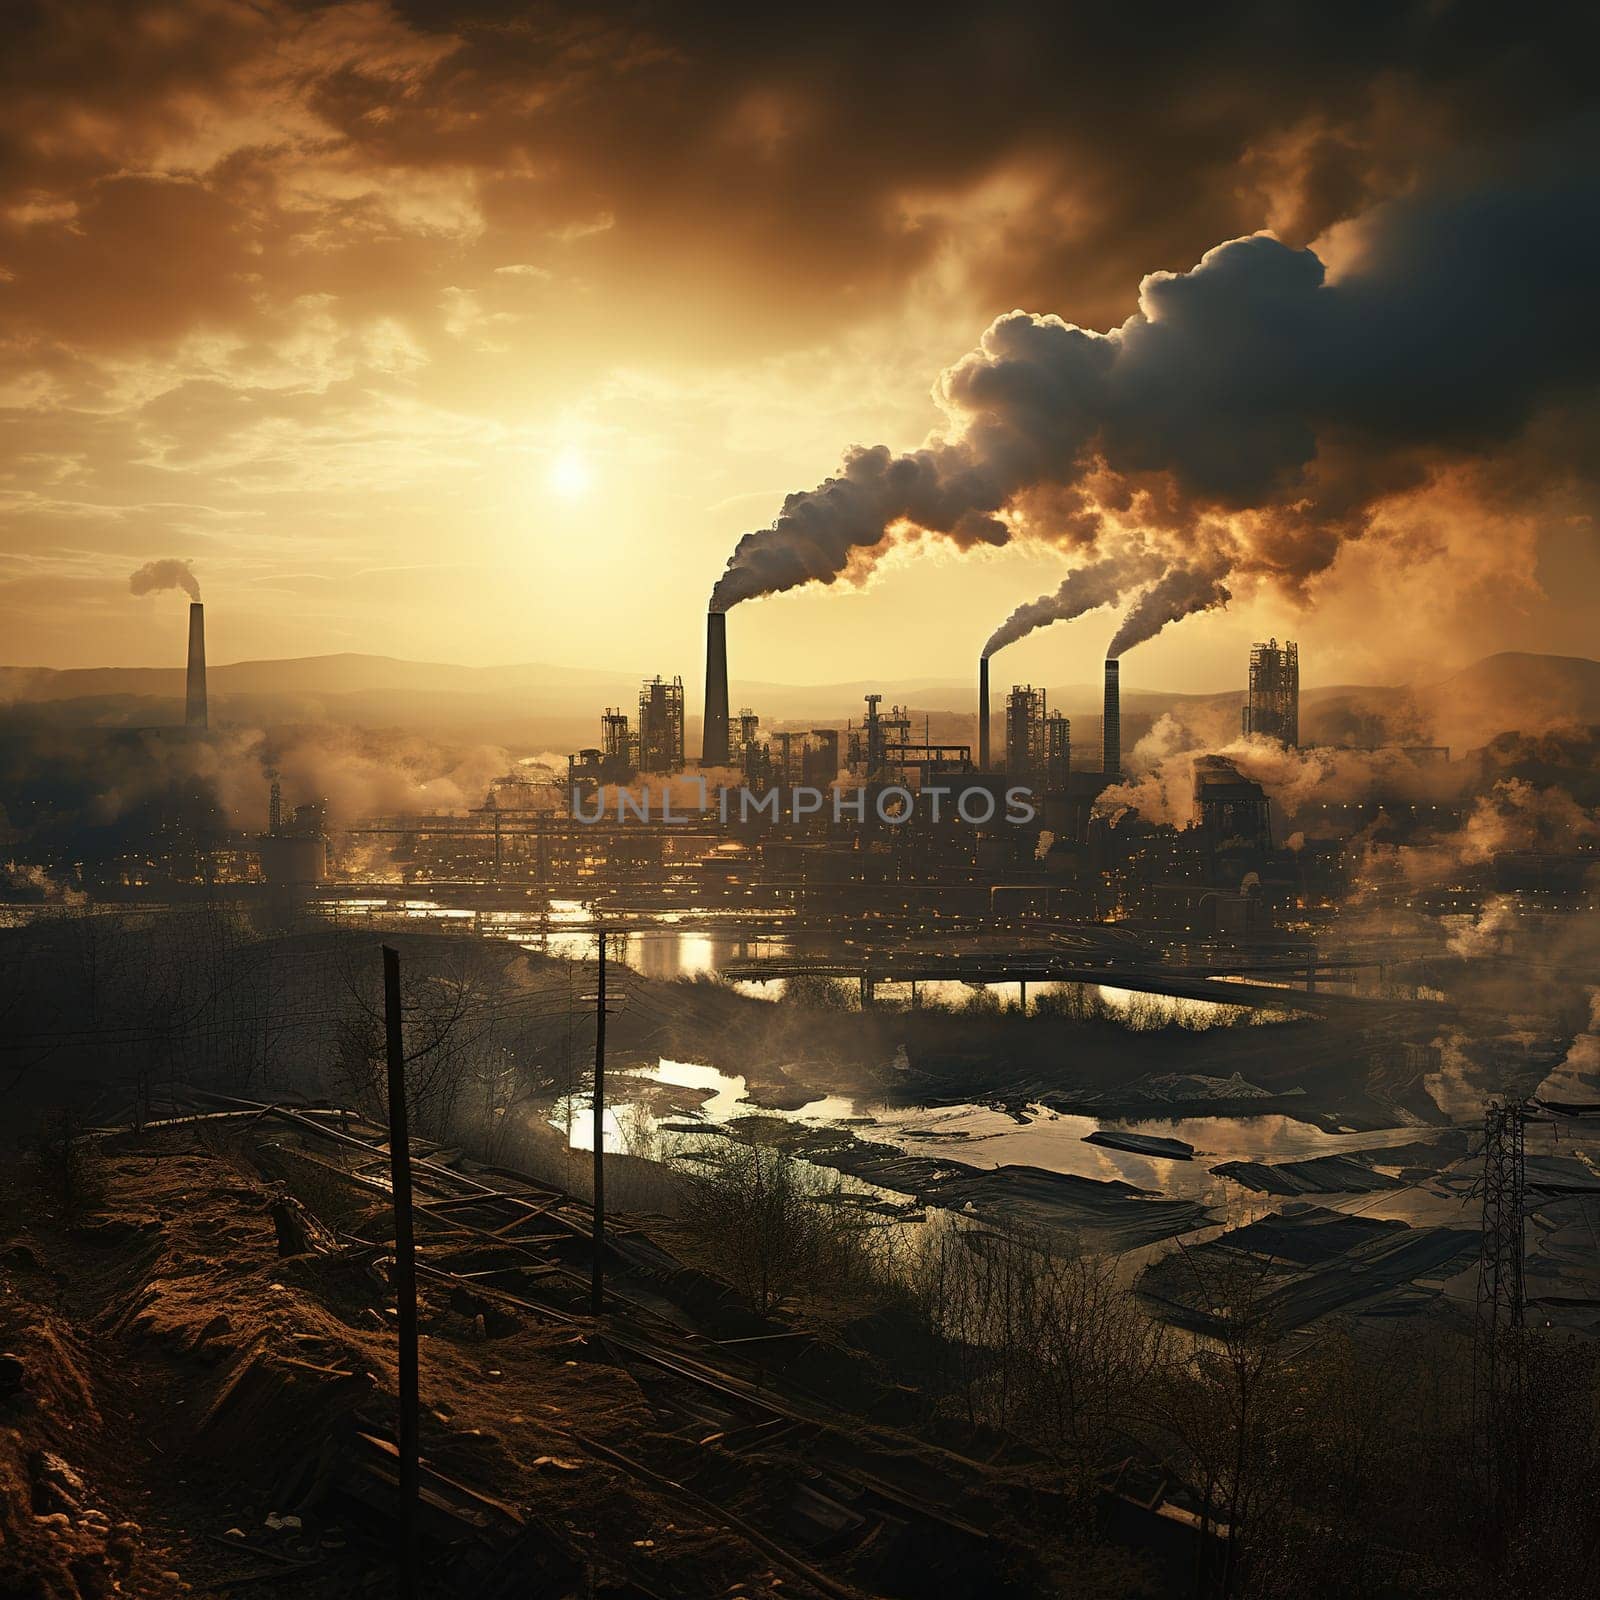 Heavy industrial factories producing smog polluting the environment, ecological issue by Kadula